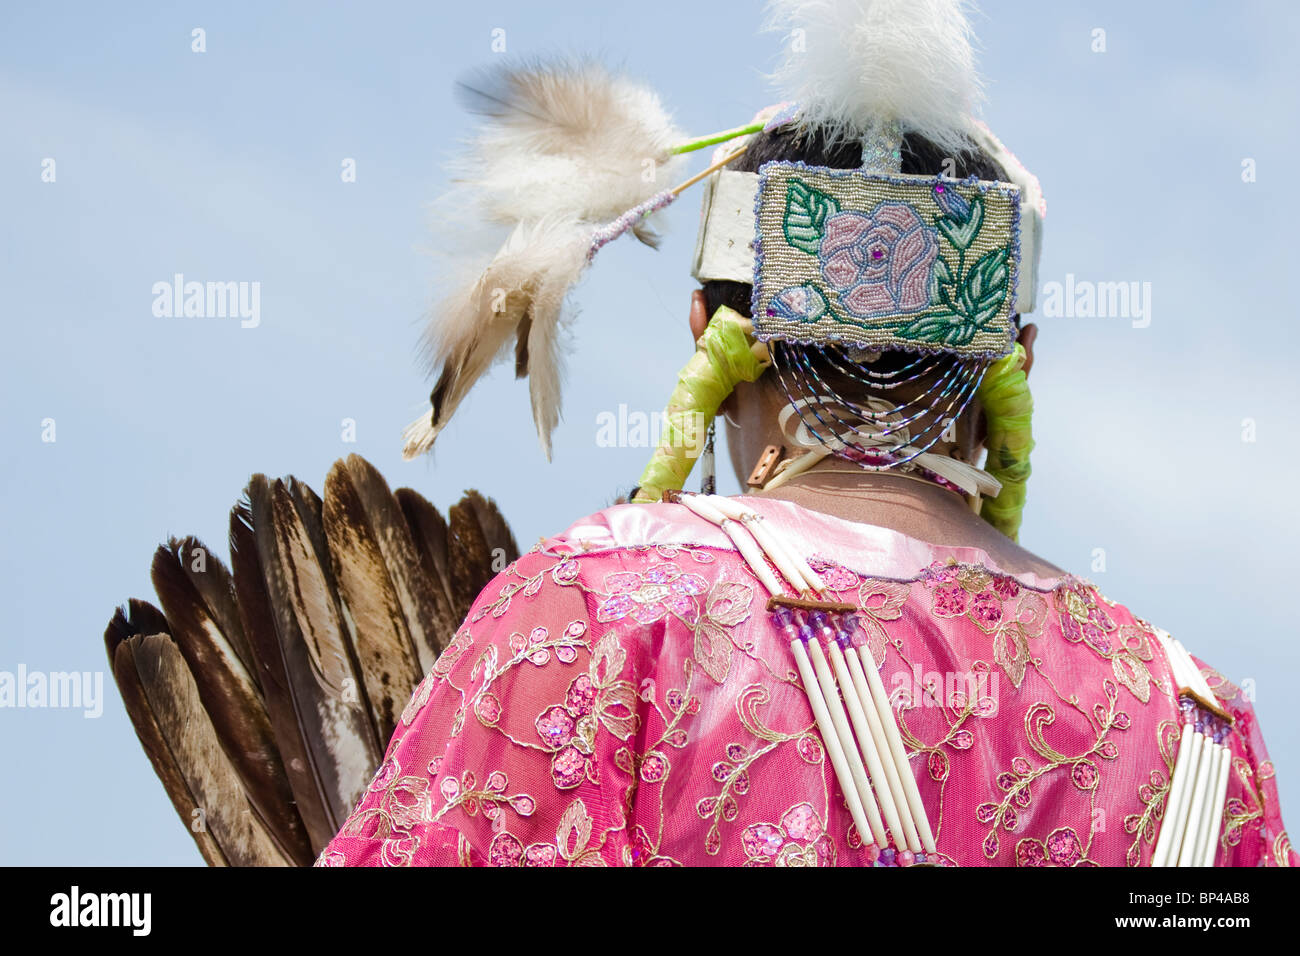 A Native American woman dances in full traditional regalia at the 8th Annual Red Wing PowWow in Virginia Beach, Virginia. Stock Photo